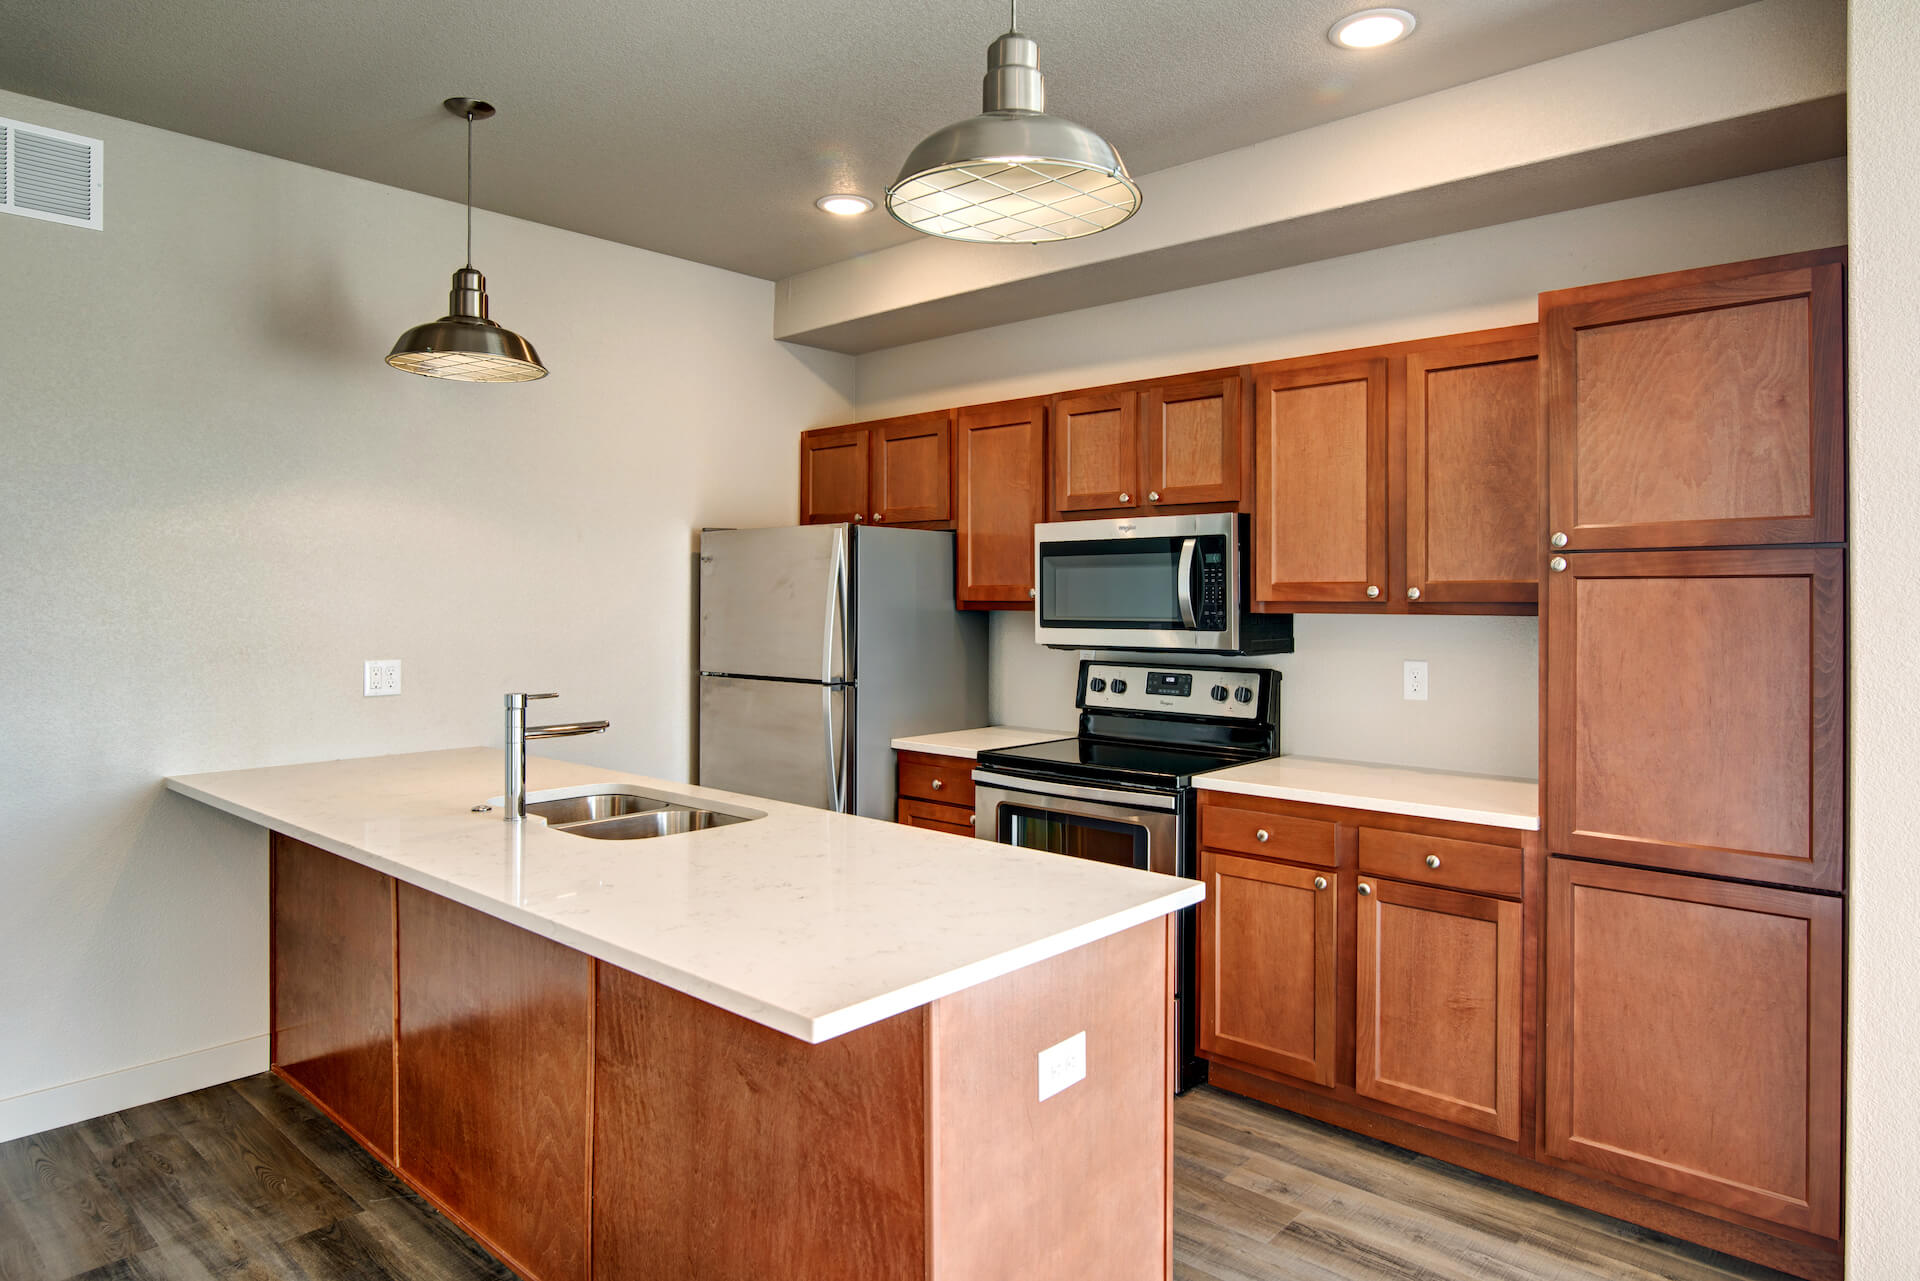 fully furnished kitchen area of a 12b lofts apartments